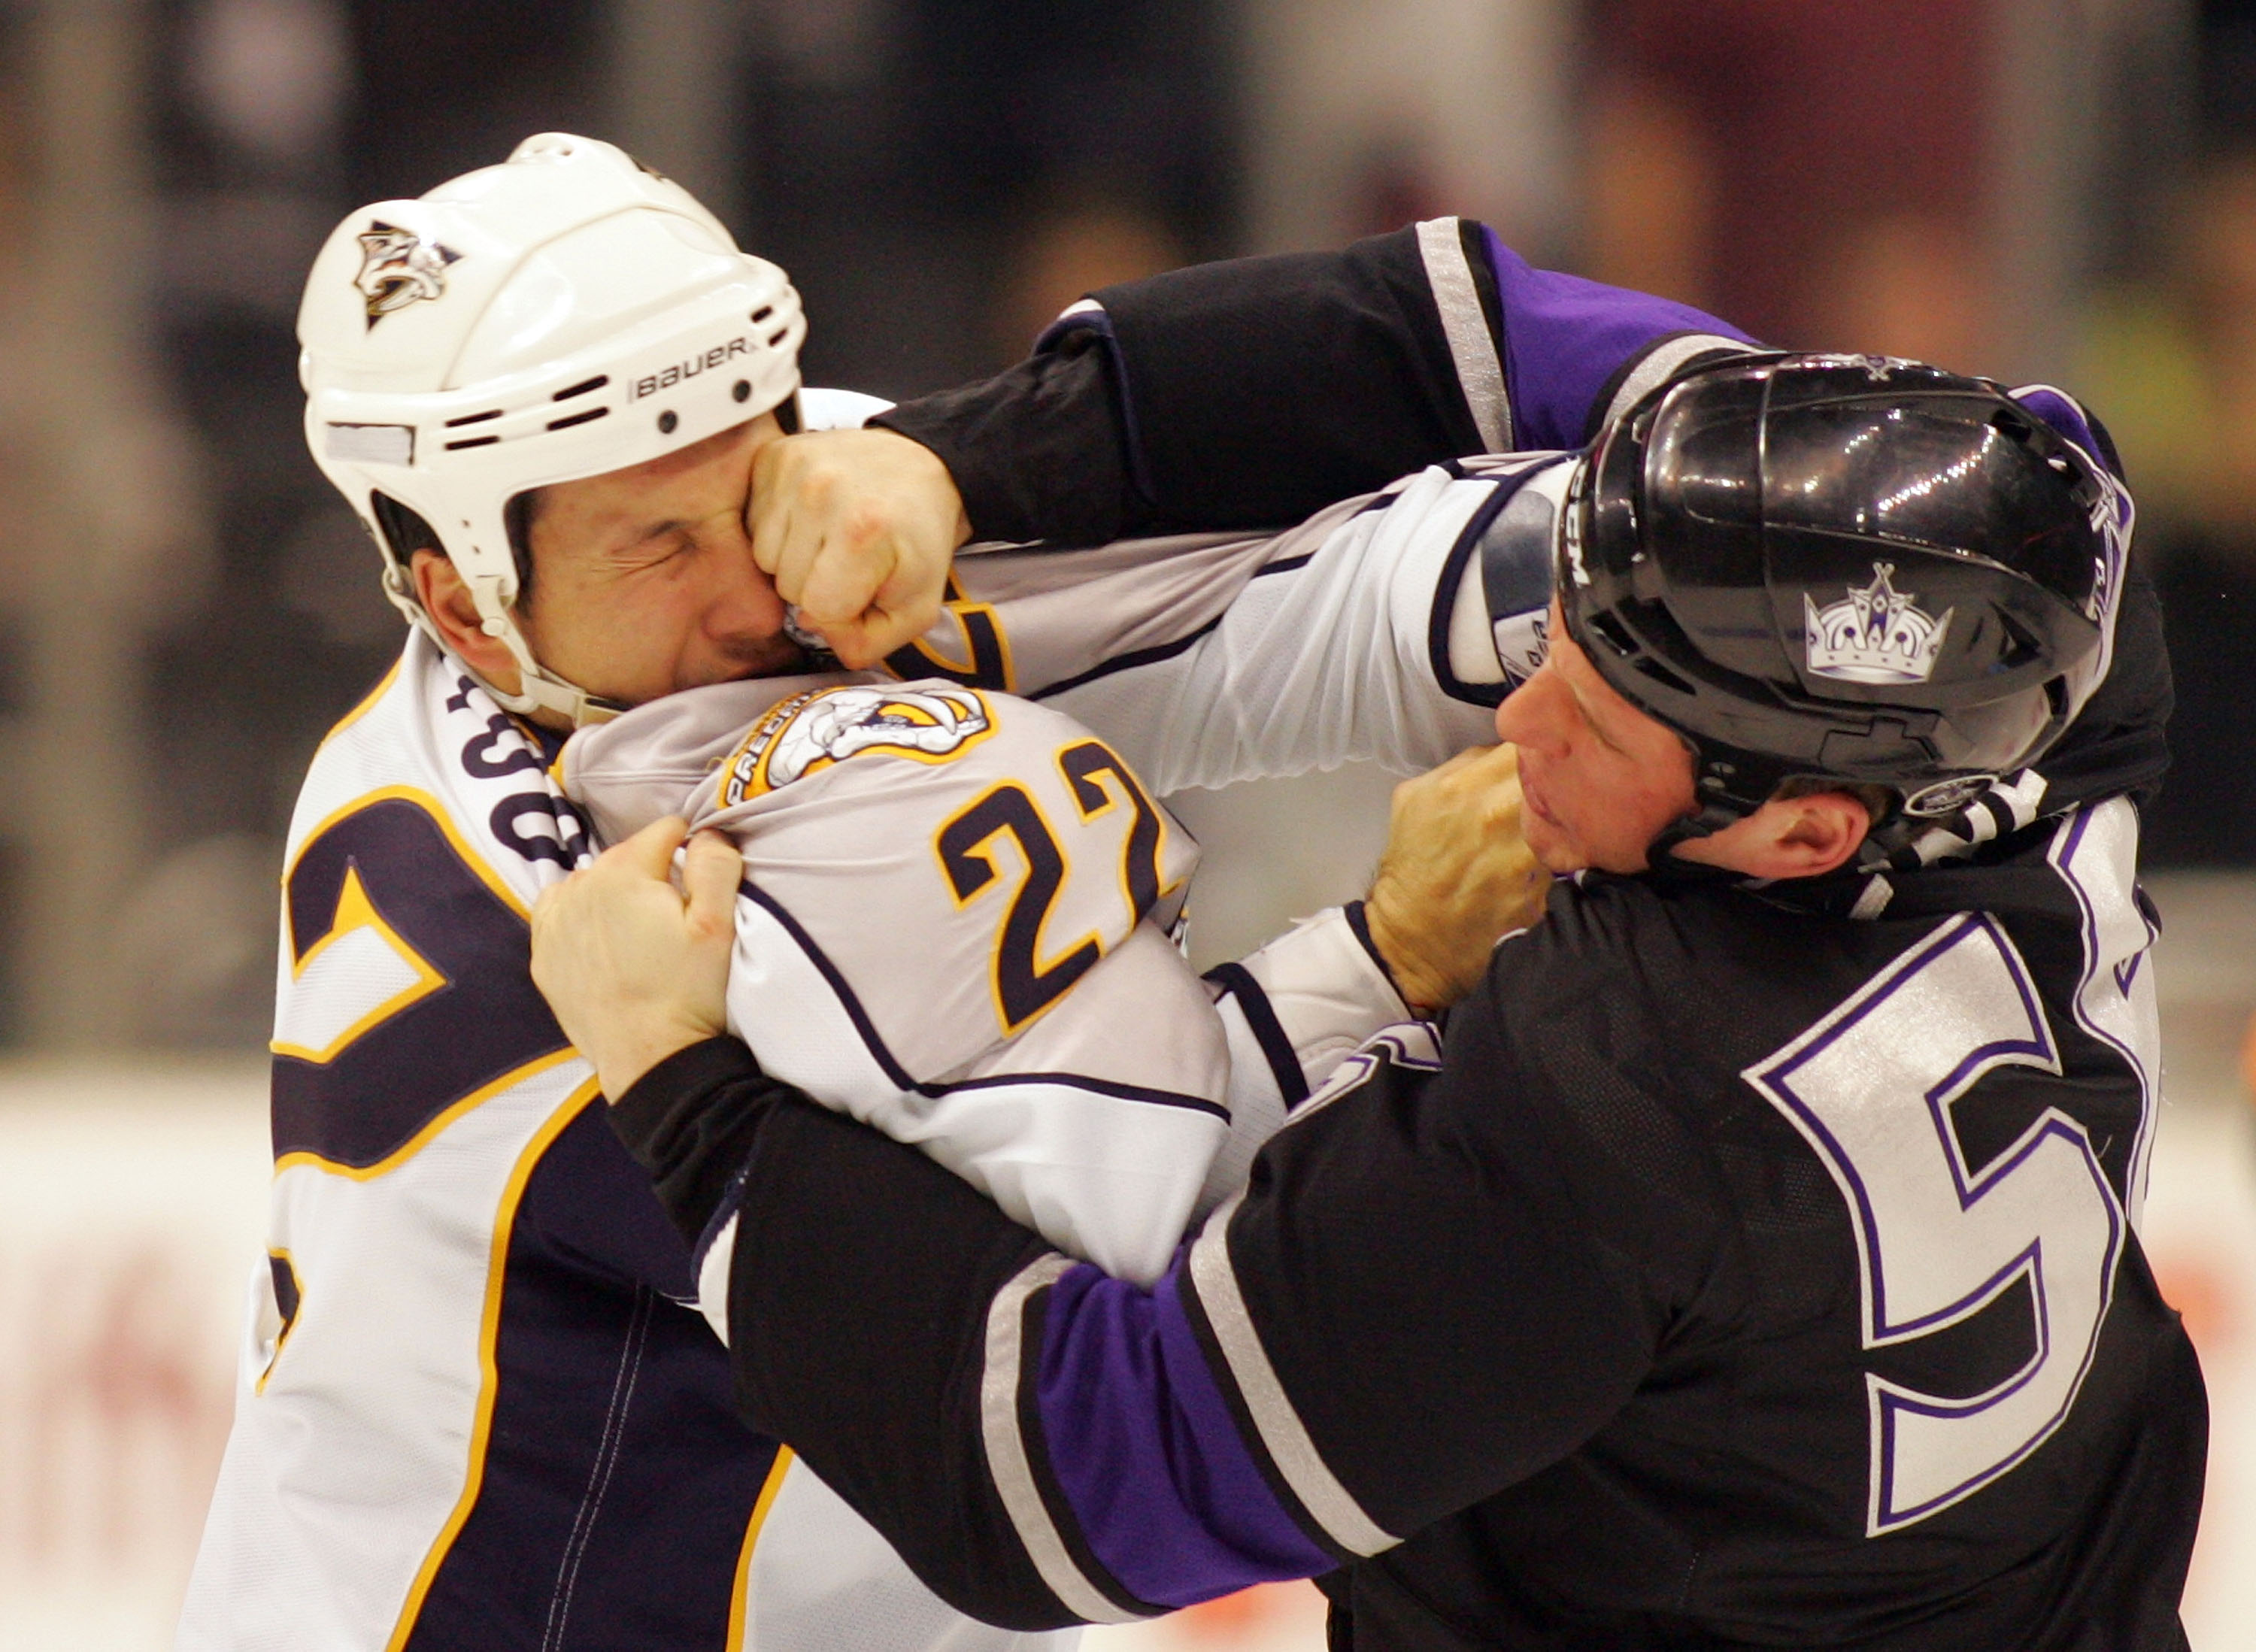 LOS ANGELES, CA - MARCH 14:  Richard Clune #56 of Los Angeles Kings punches Jordin Tootoo #22 of the Nashville Predators during their fight in the second period of their NHL game at the Staples Center on March 14, 2010 in Los Angeles, California.  (Photo 